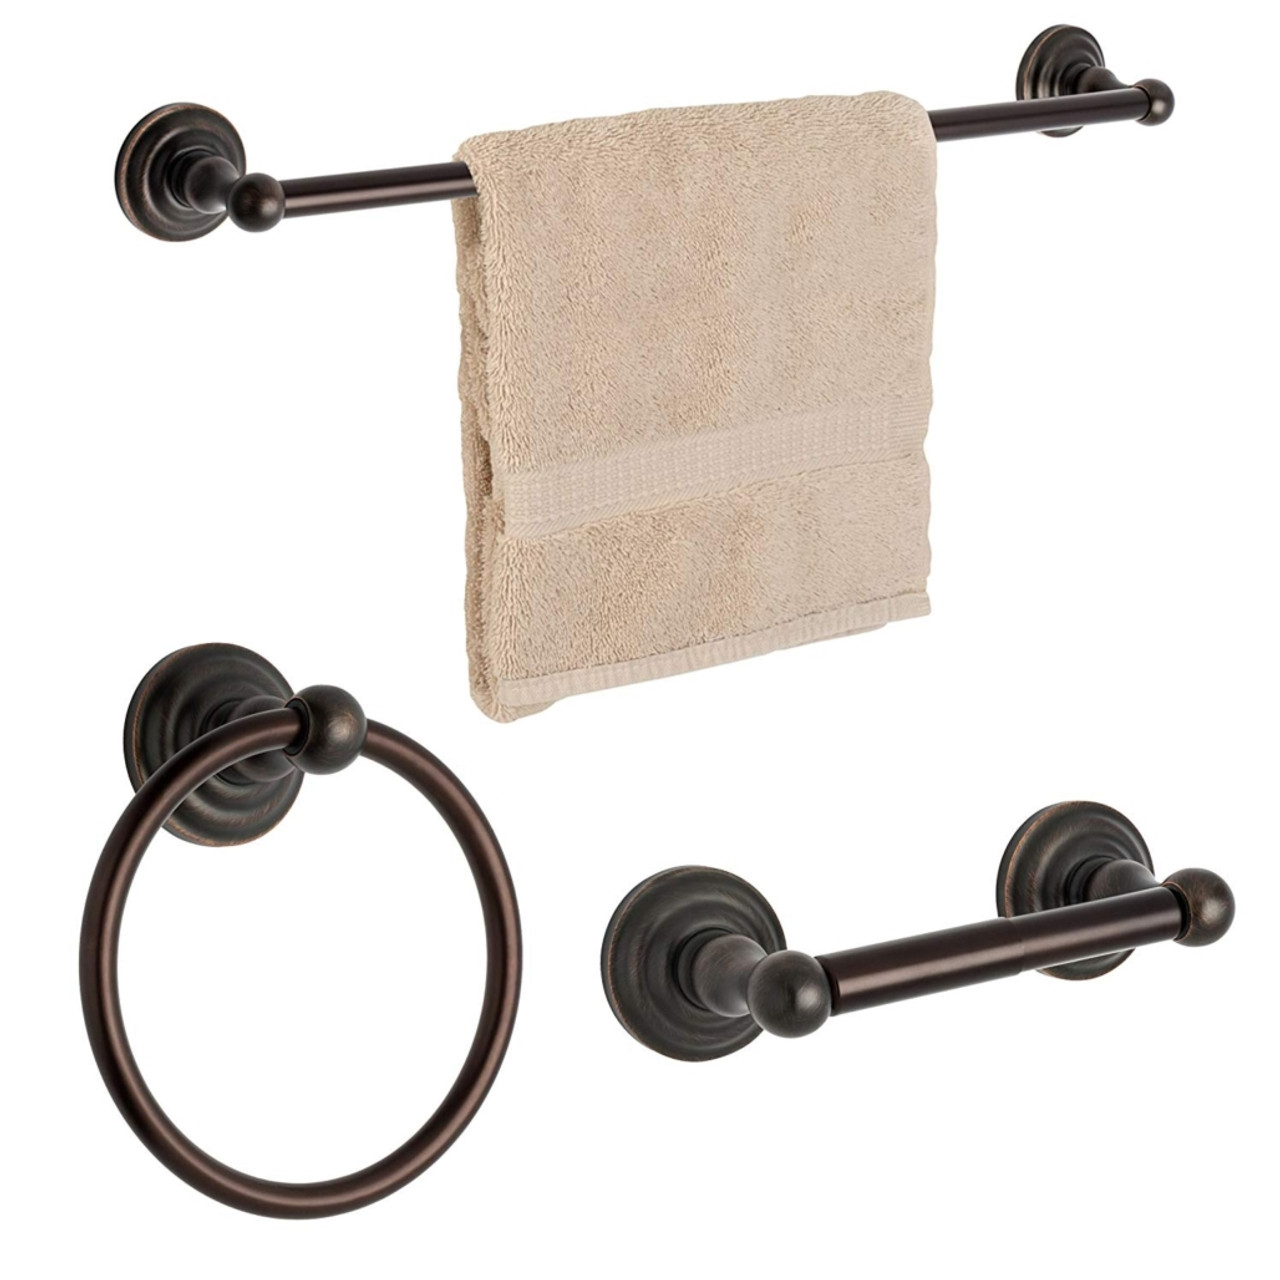 Allied Brass P1025EW-ORB Skyline Collection Wall Mounted Paper Towel Holder, Oil Rubbed Bronze